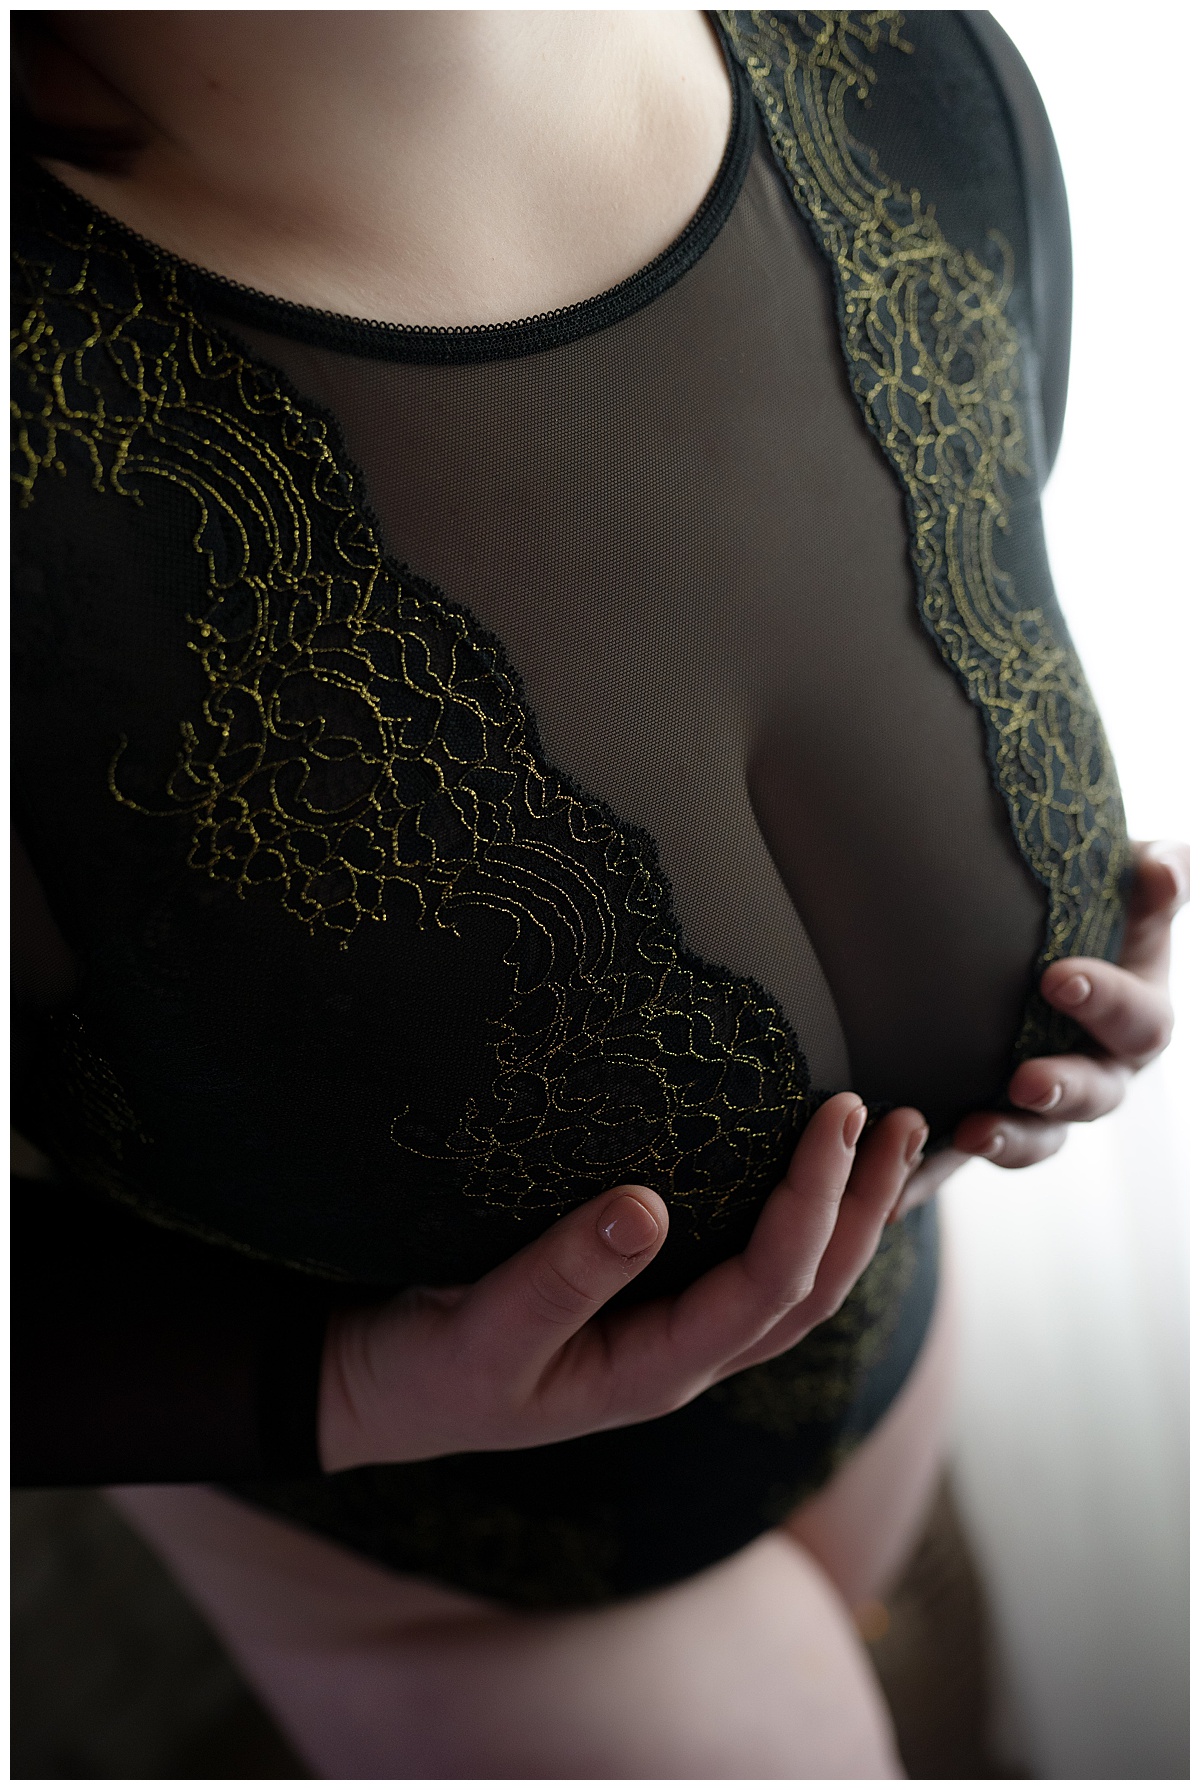 Adult suggests Book Your Boudoir Session as she covers chest with hands wearing black lingerie 